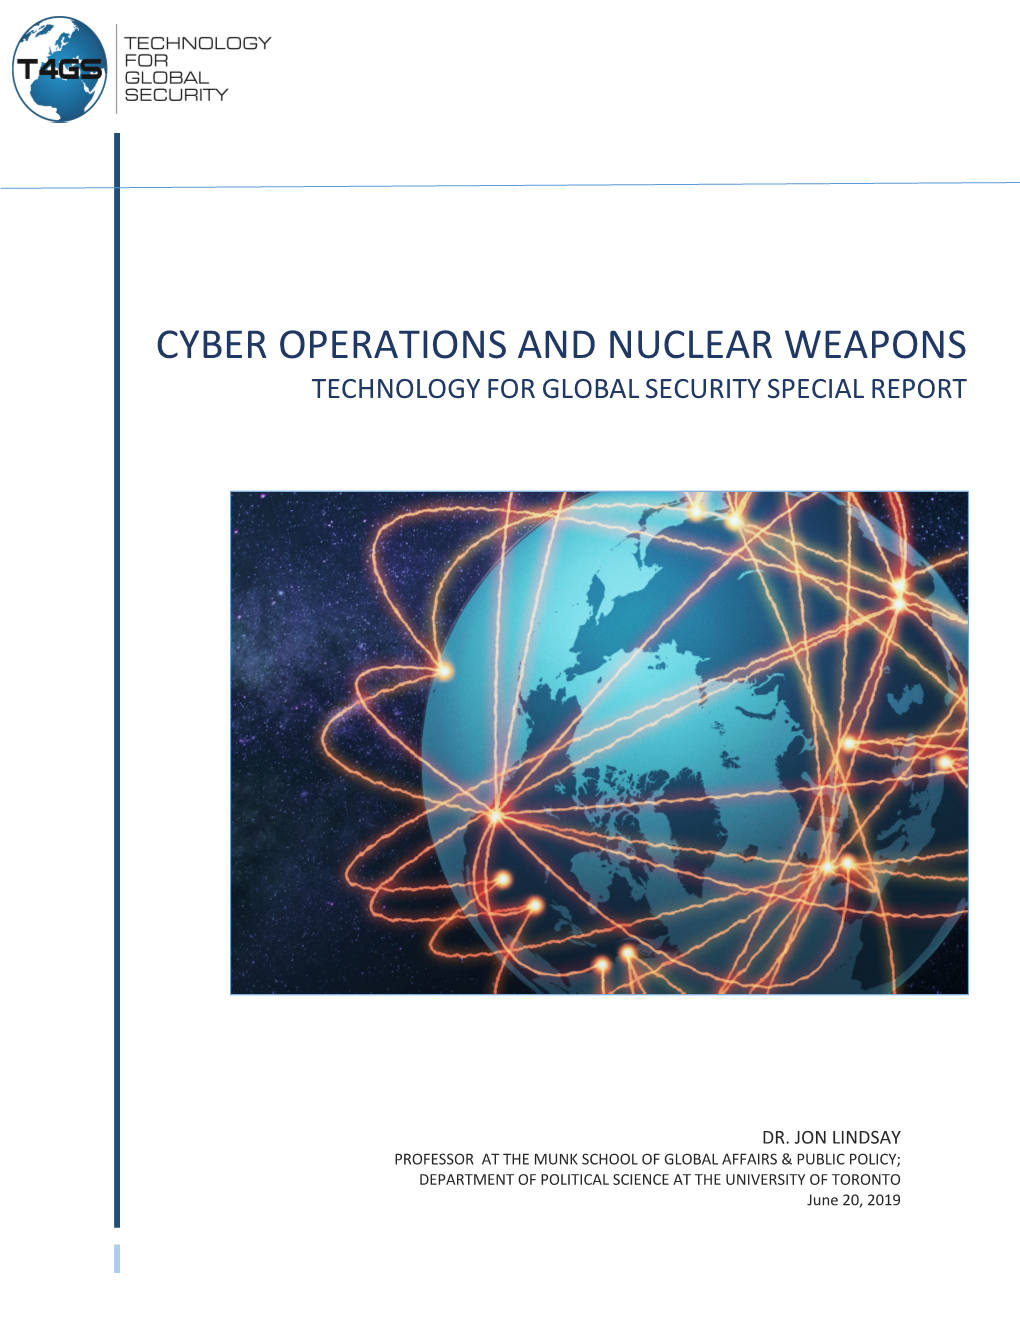 Cyber Operations and Nuclear Weapons Technology for Global Security Special Report